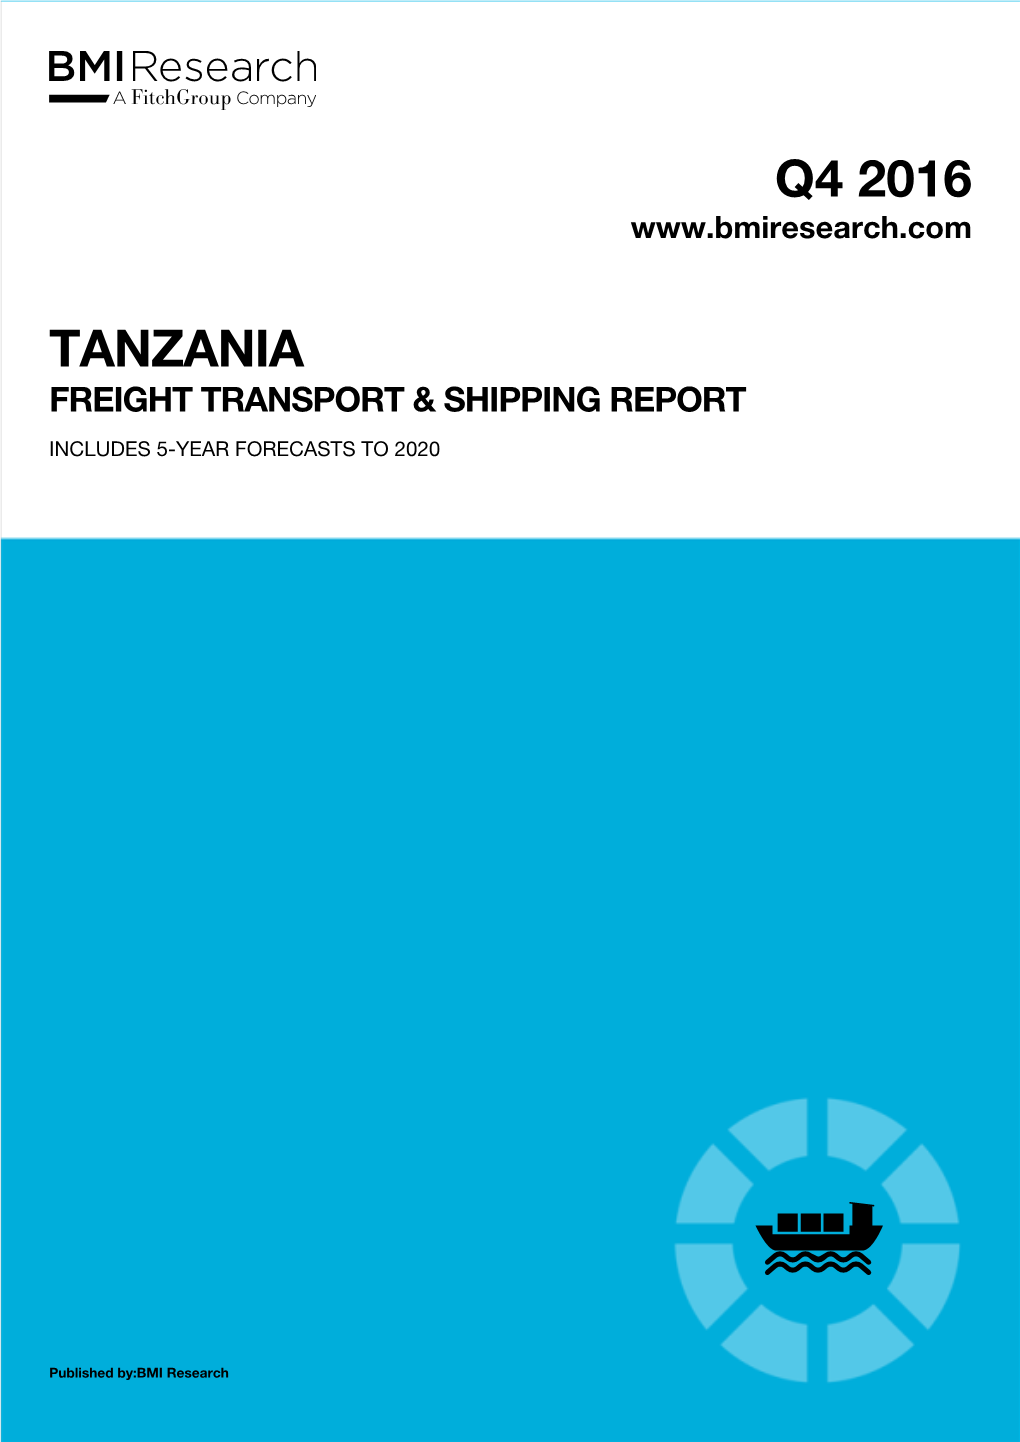 BMI-Tanzania-Freight-Transport-And-Shipping-Report-Q4-2016.Pdf